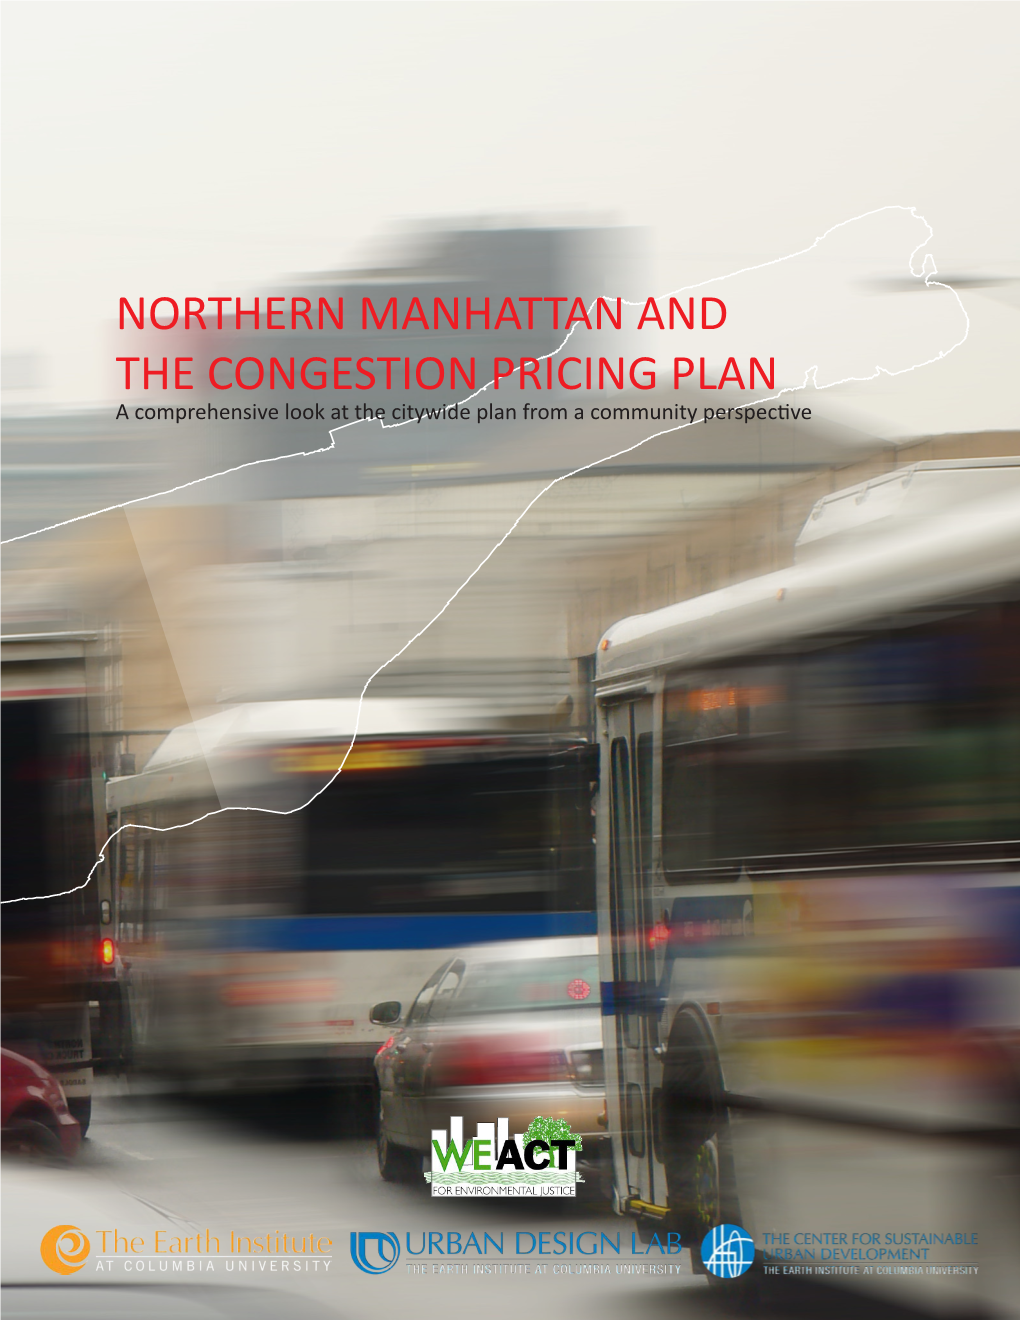 Northern Manhattan and the Congestion Pricing Plan